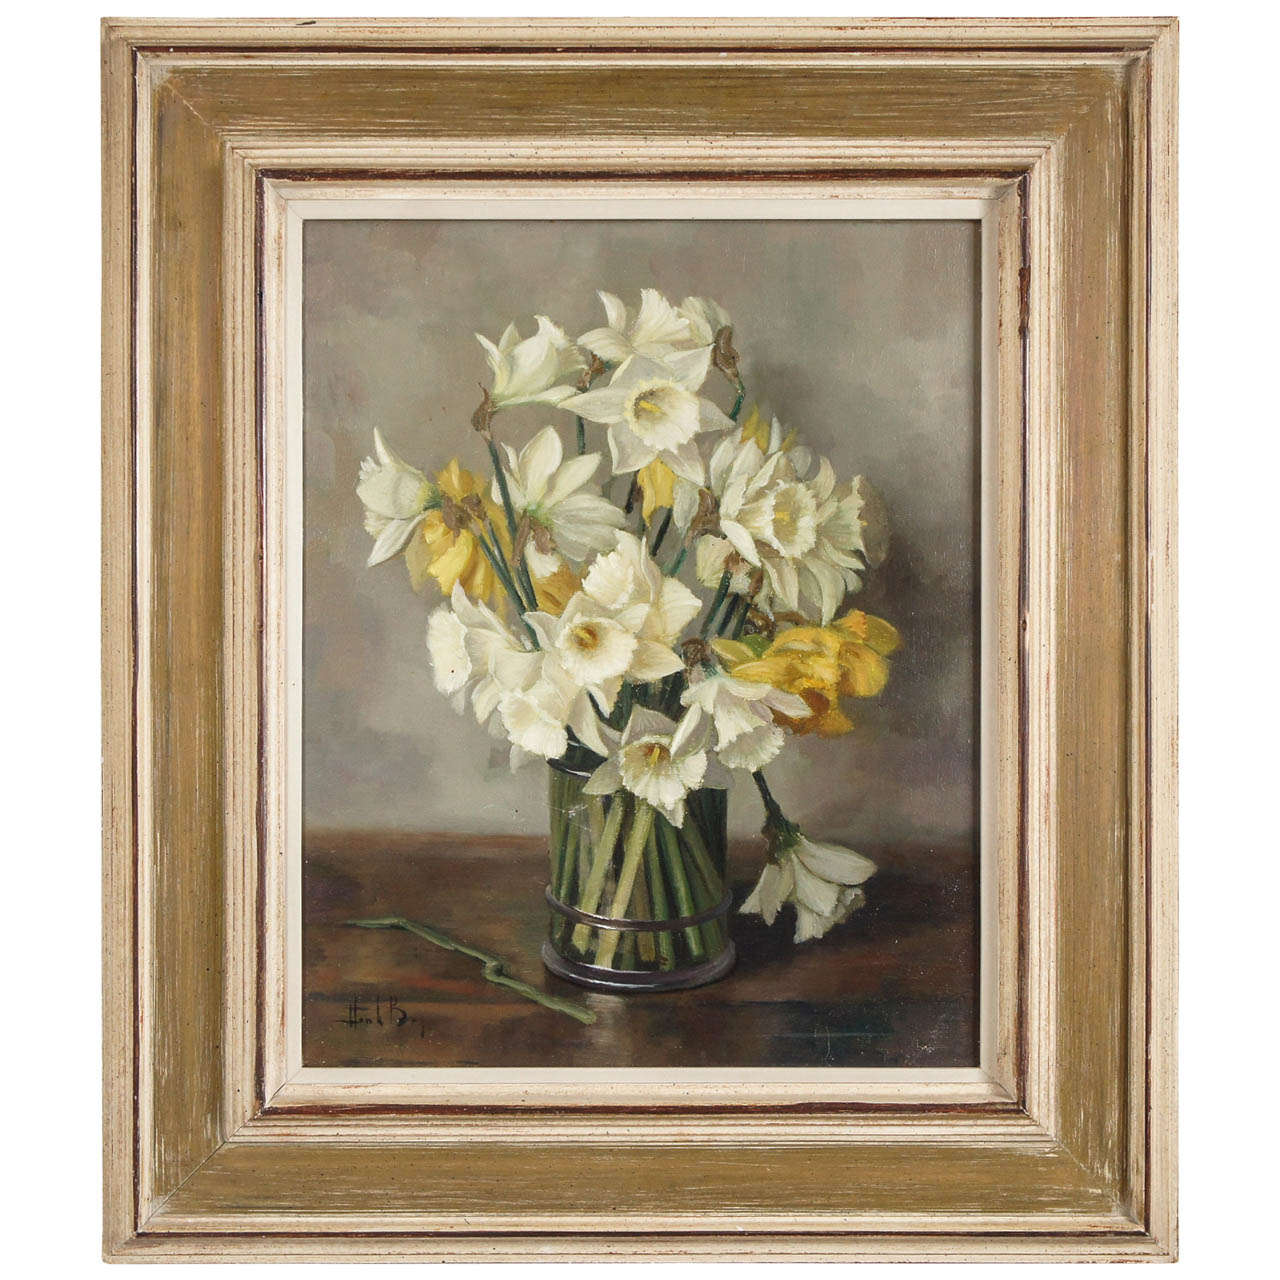 Daffodils Still Life Oil Painting